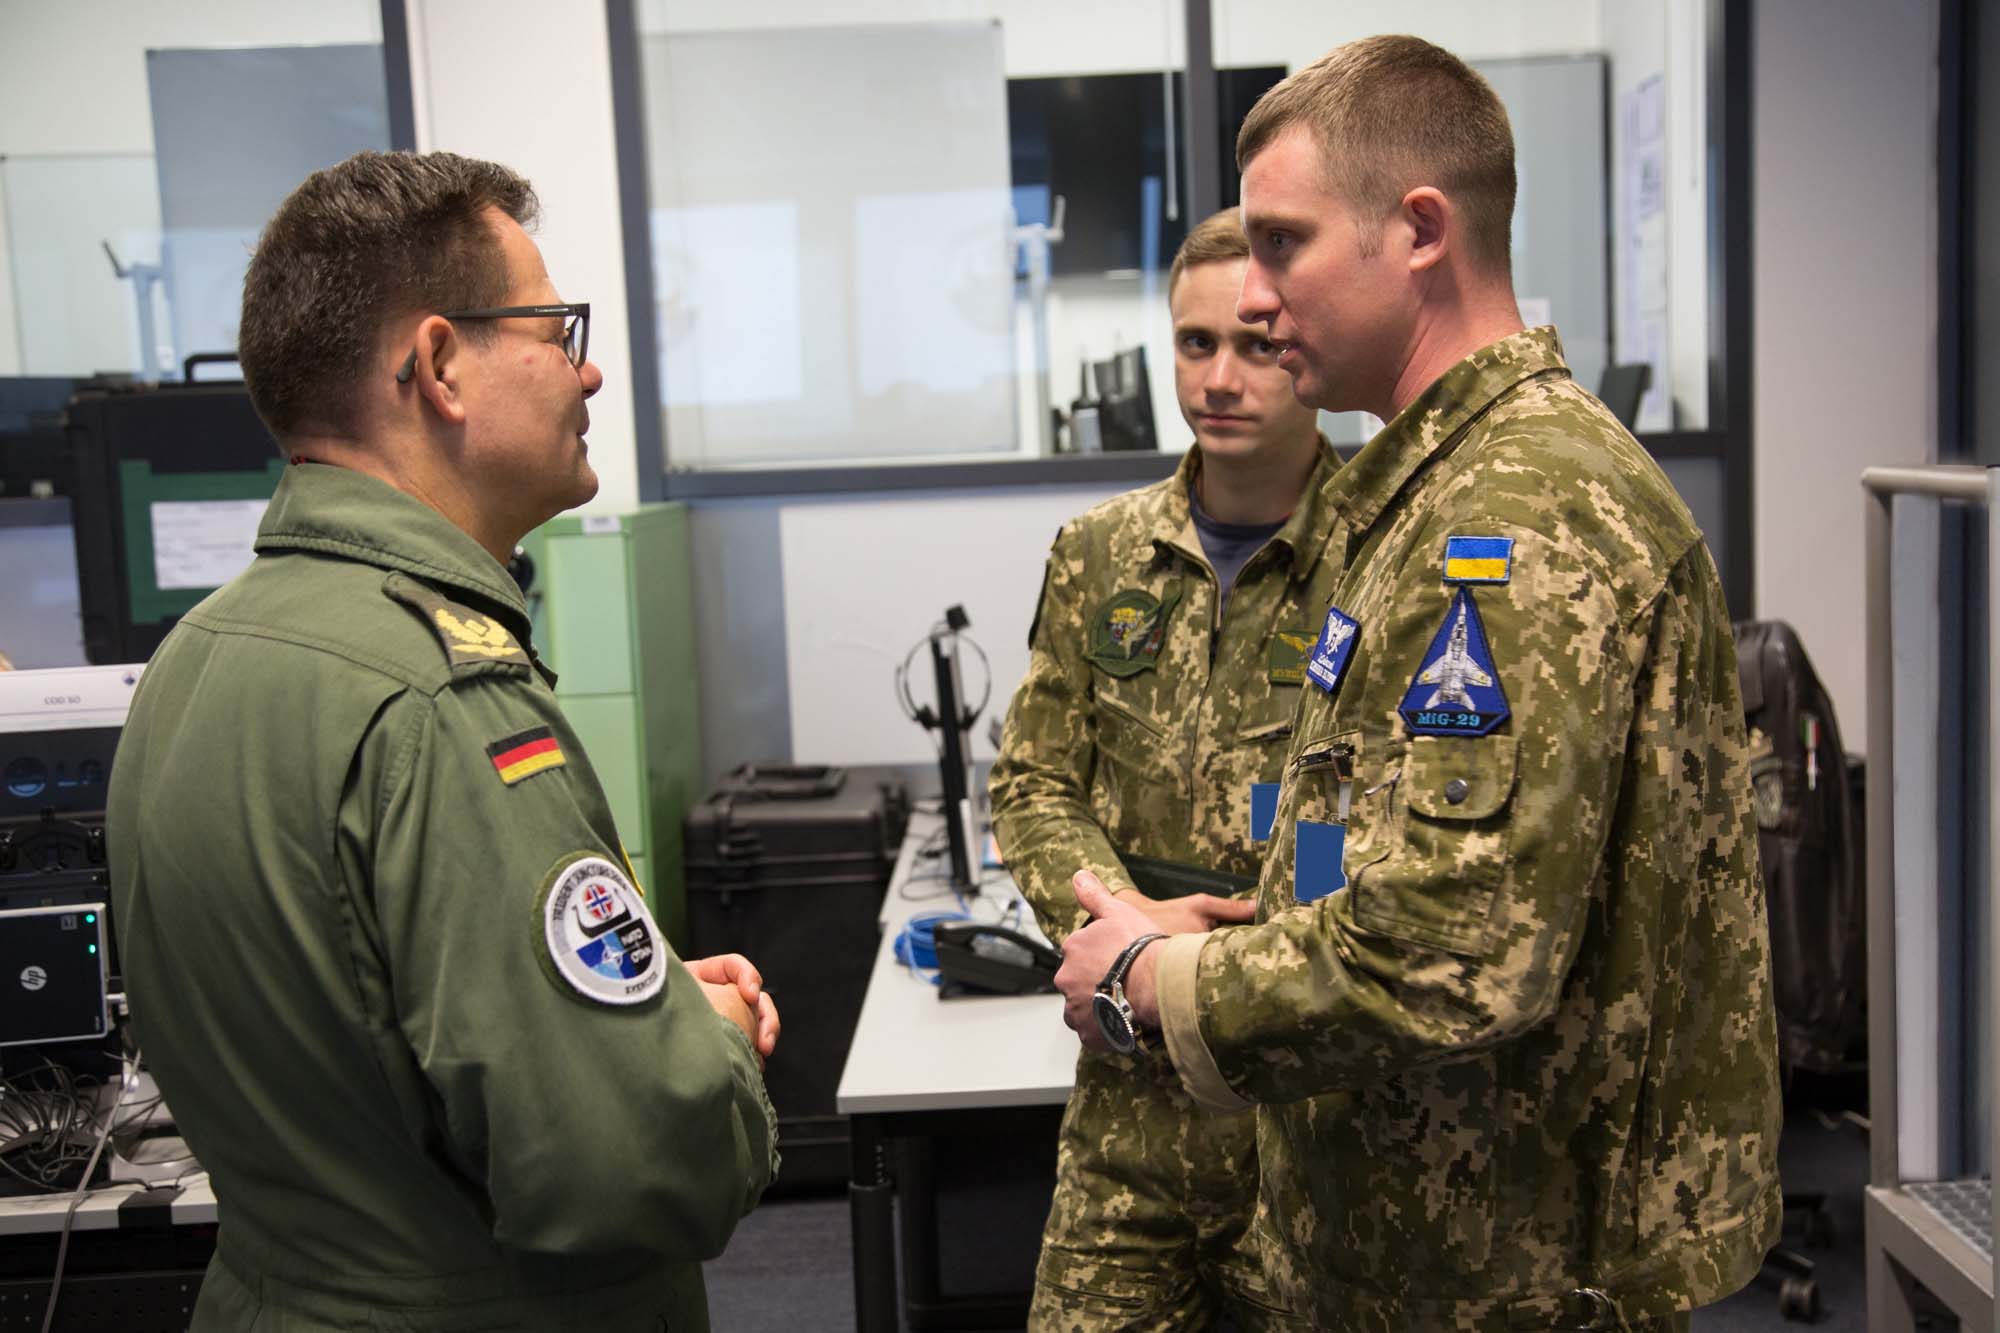 BGen Karsten Stoye, Deputy Chief of Staff Operations (DCOS OPS), discussing with two Ukrainian Mig29 Pilots during Exercise Trident Juncture 18 CPX.